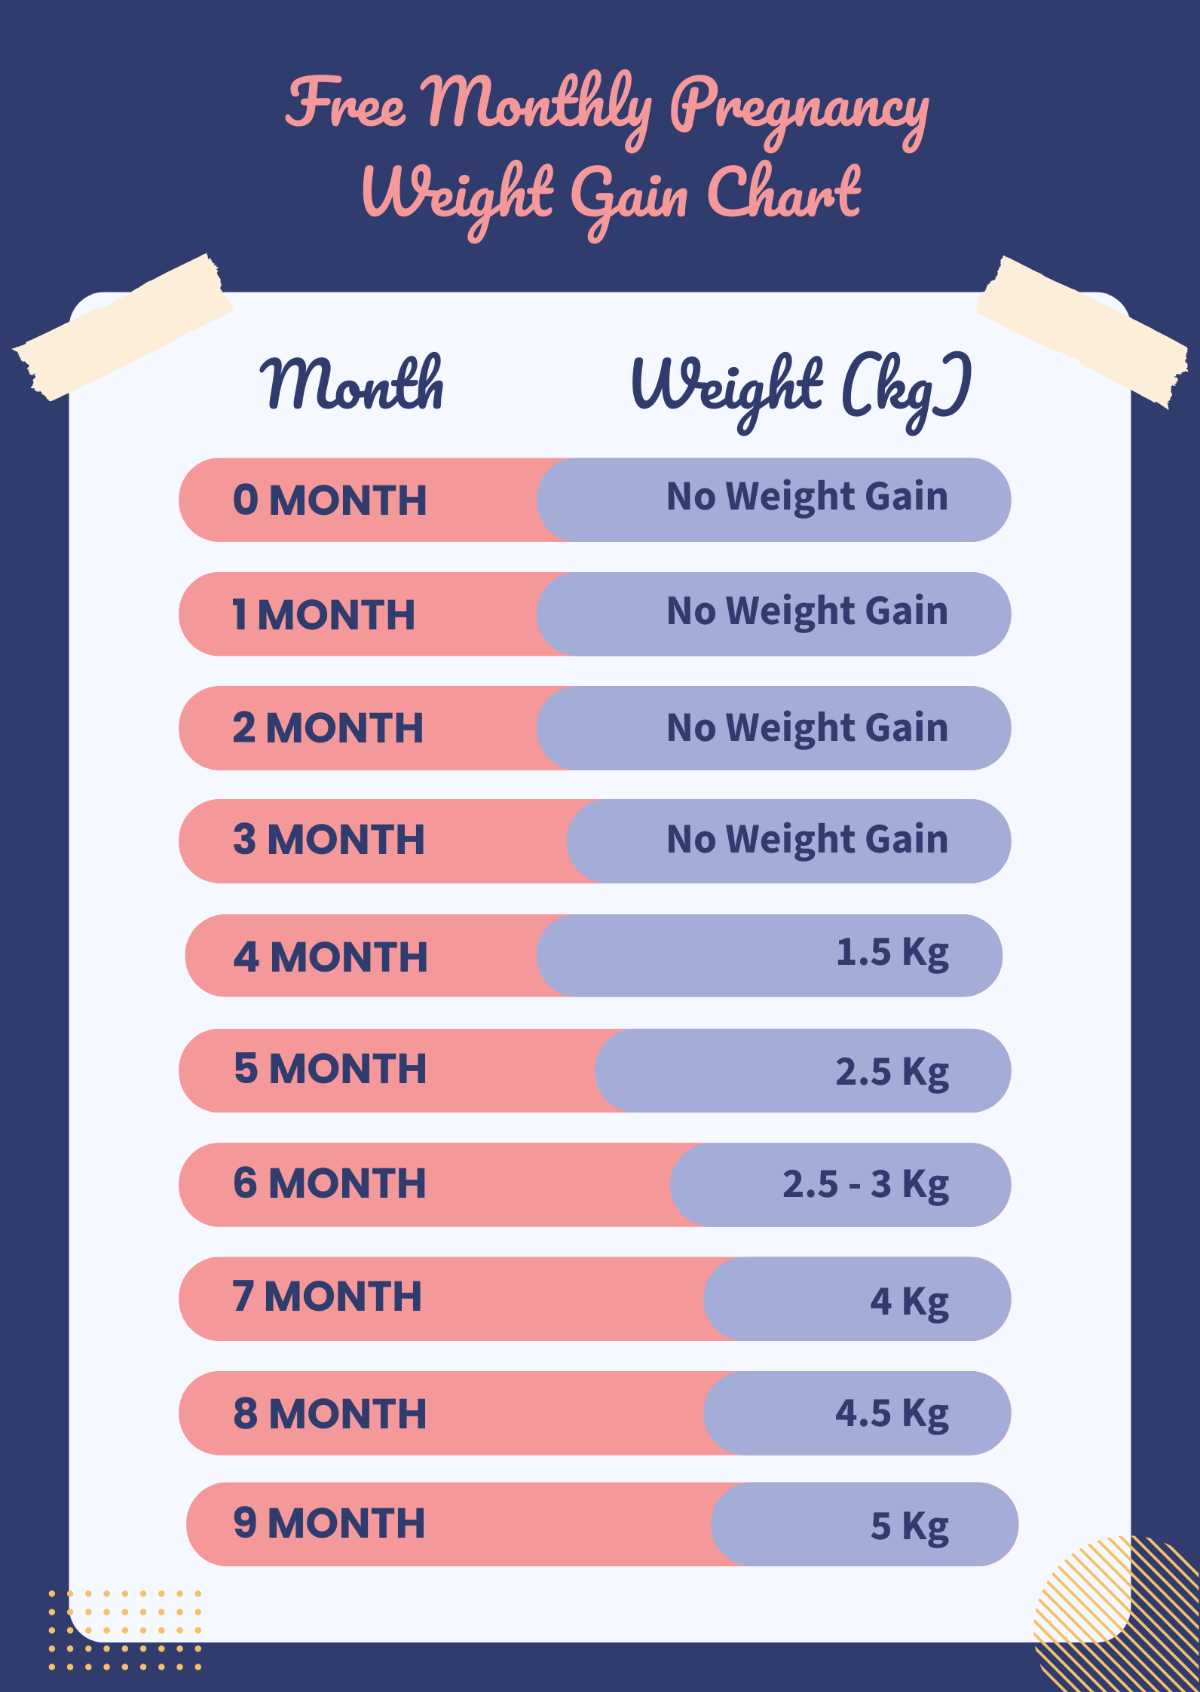 Monthly Pregnancy Weight Gain Chart